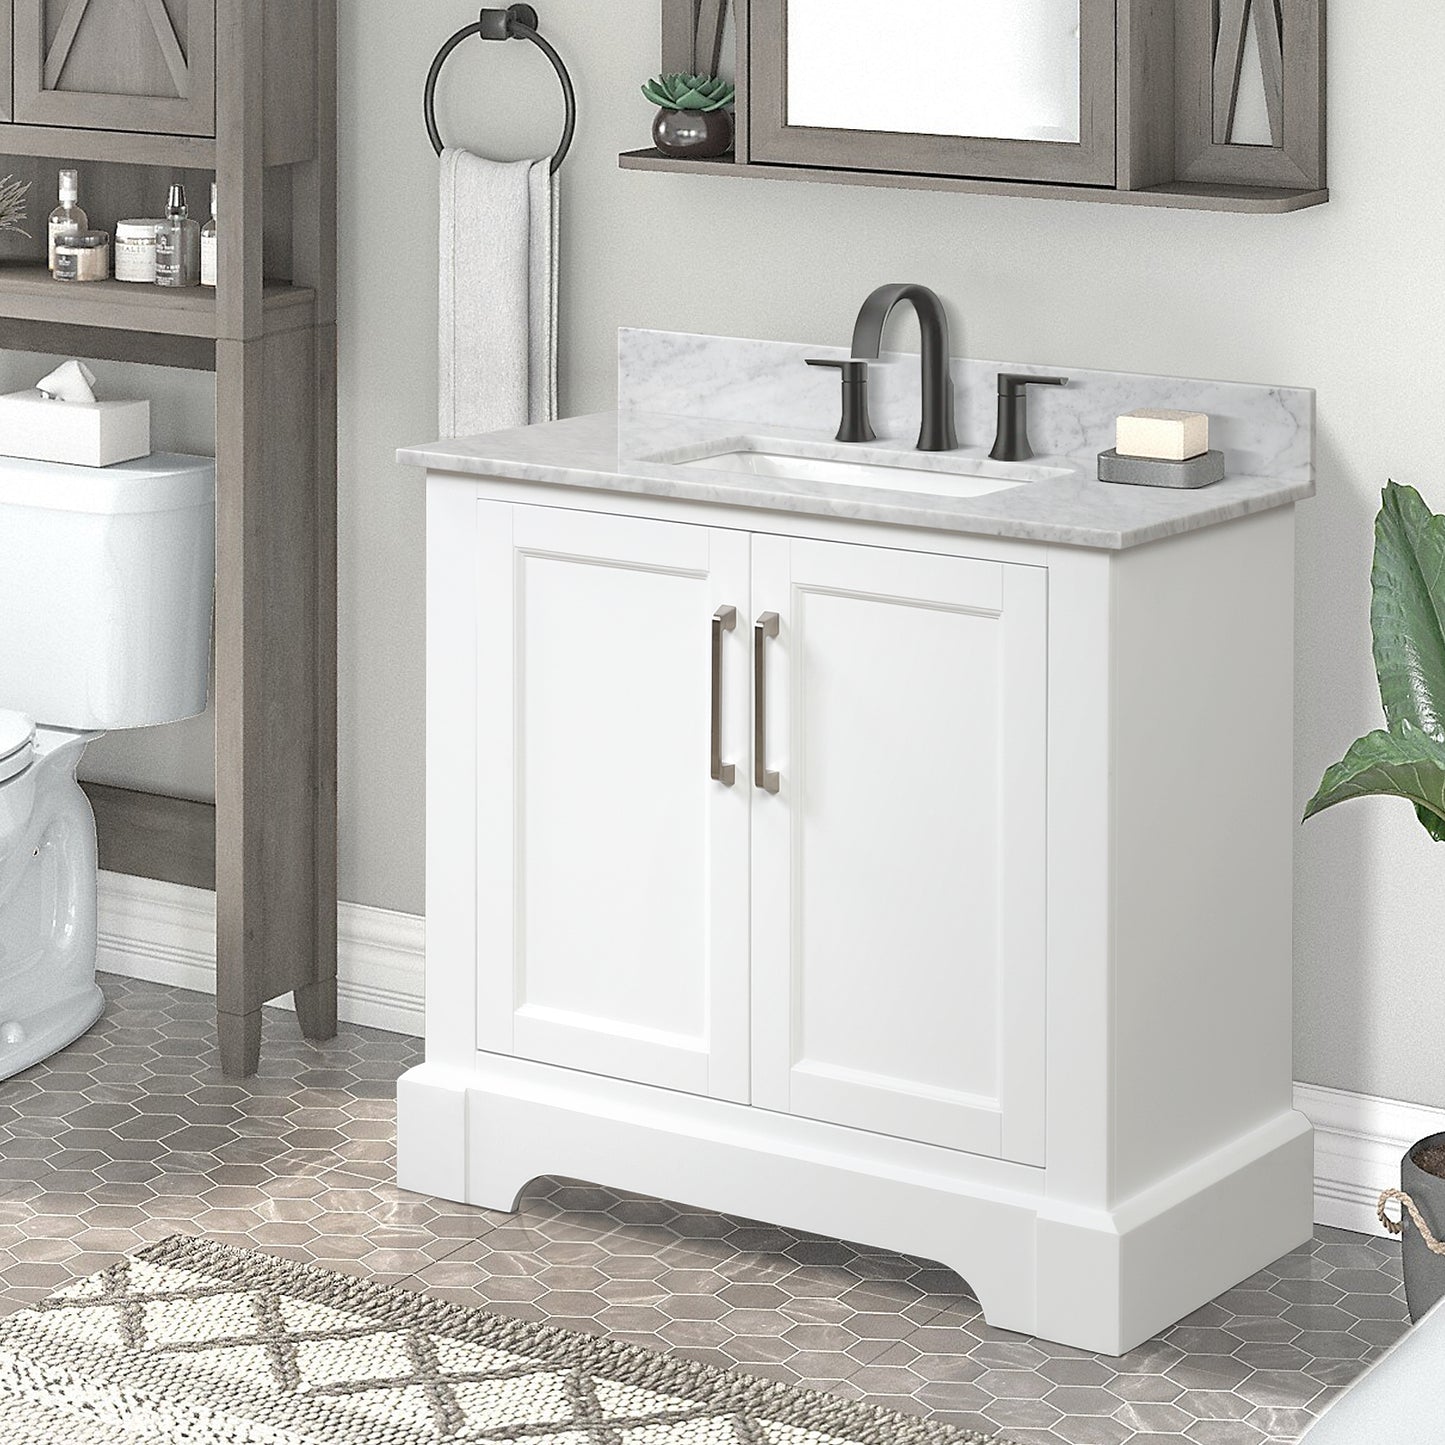 36&rdquo; Single Solid Wood Bathroom Vanity Set, with Drawers, Carrara White Marble Top, 3 Faucet Hole